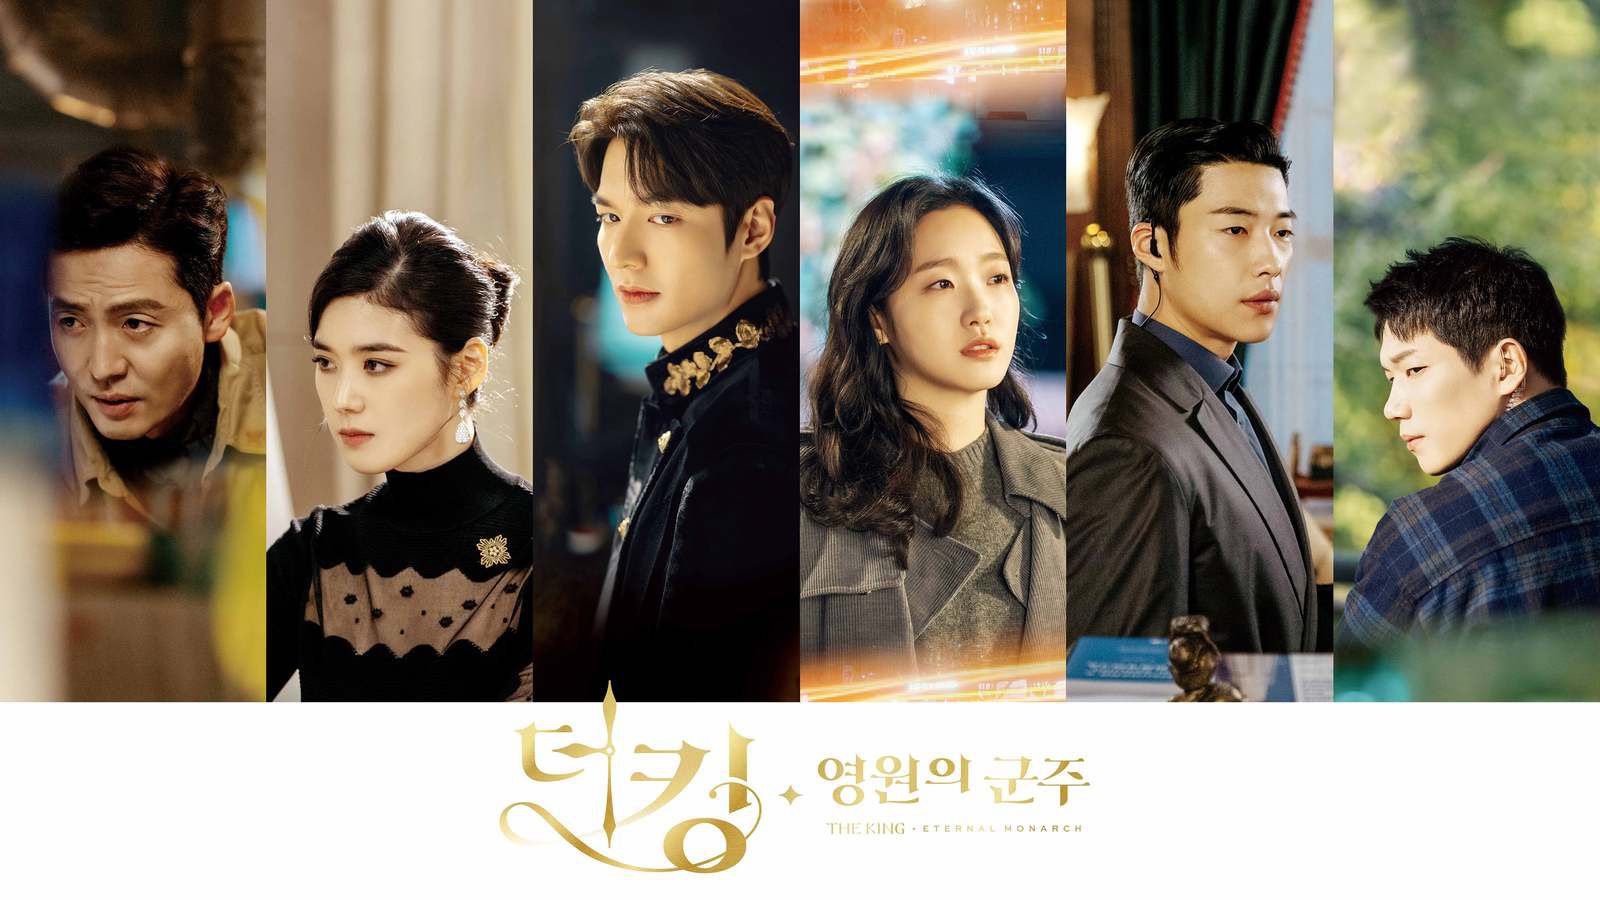 Episode 3. The King: Eternal Monarch EP.3 [Eng Sub] On flix